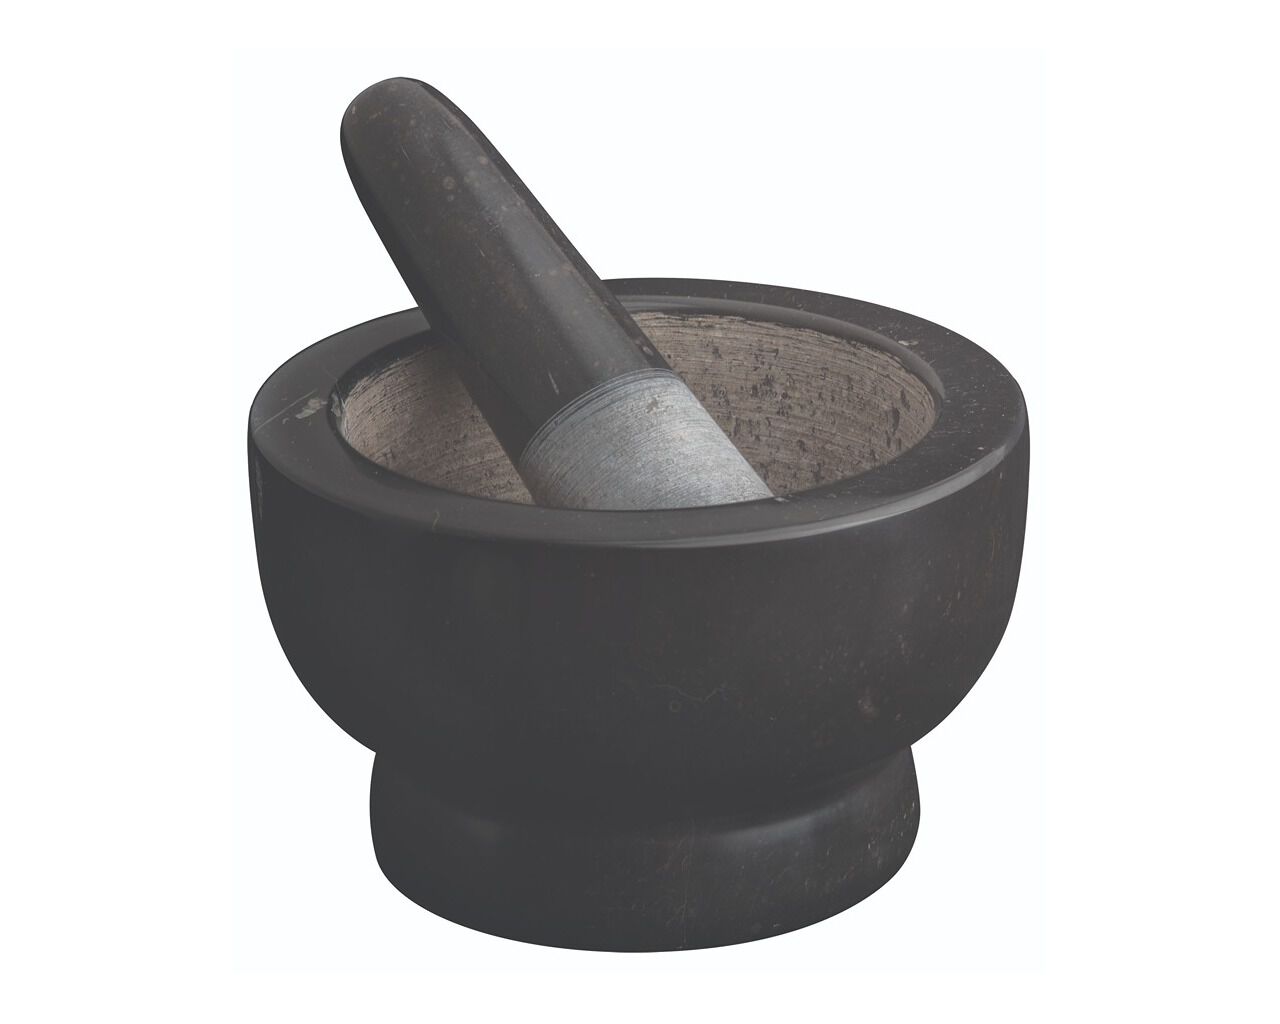 Avanti Marble Footed Mortar And Pestle - Black